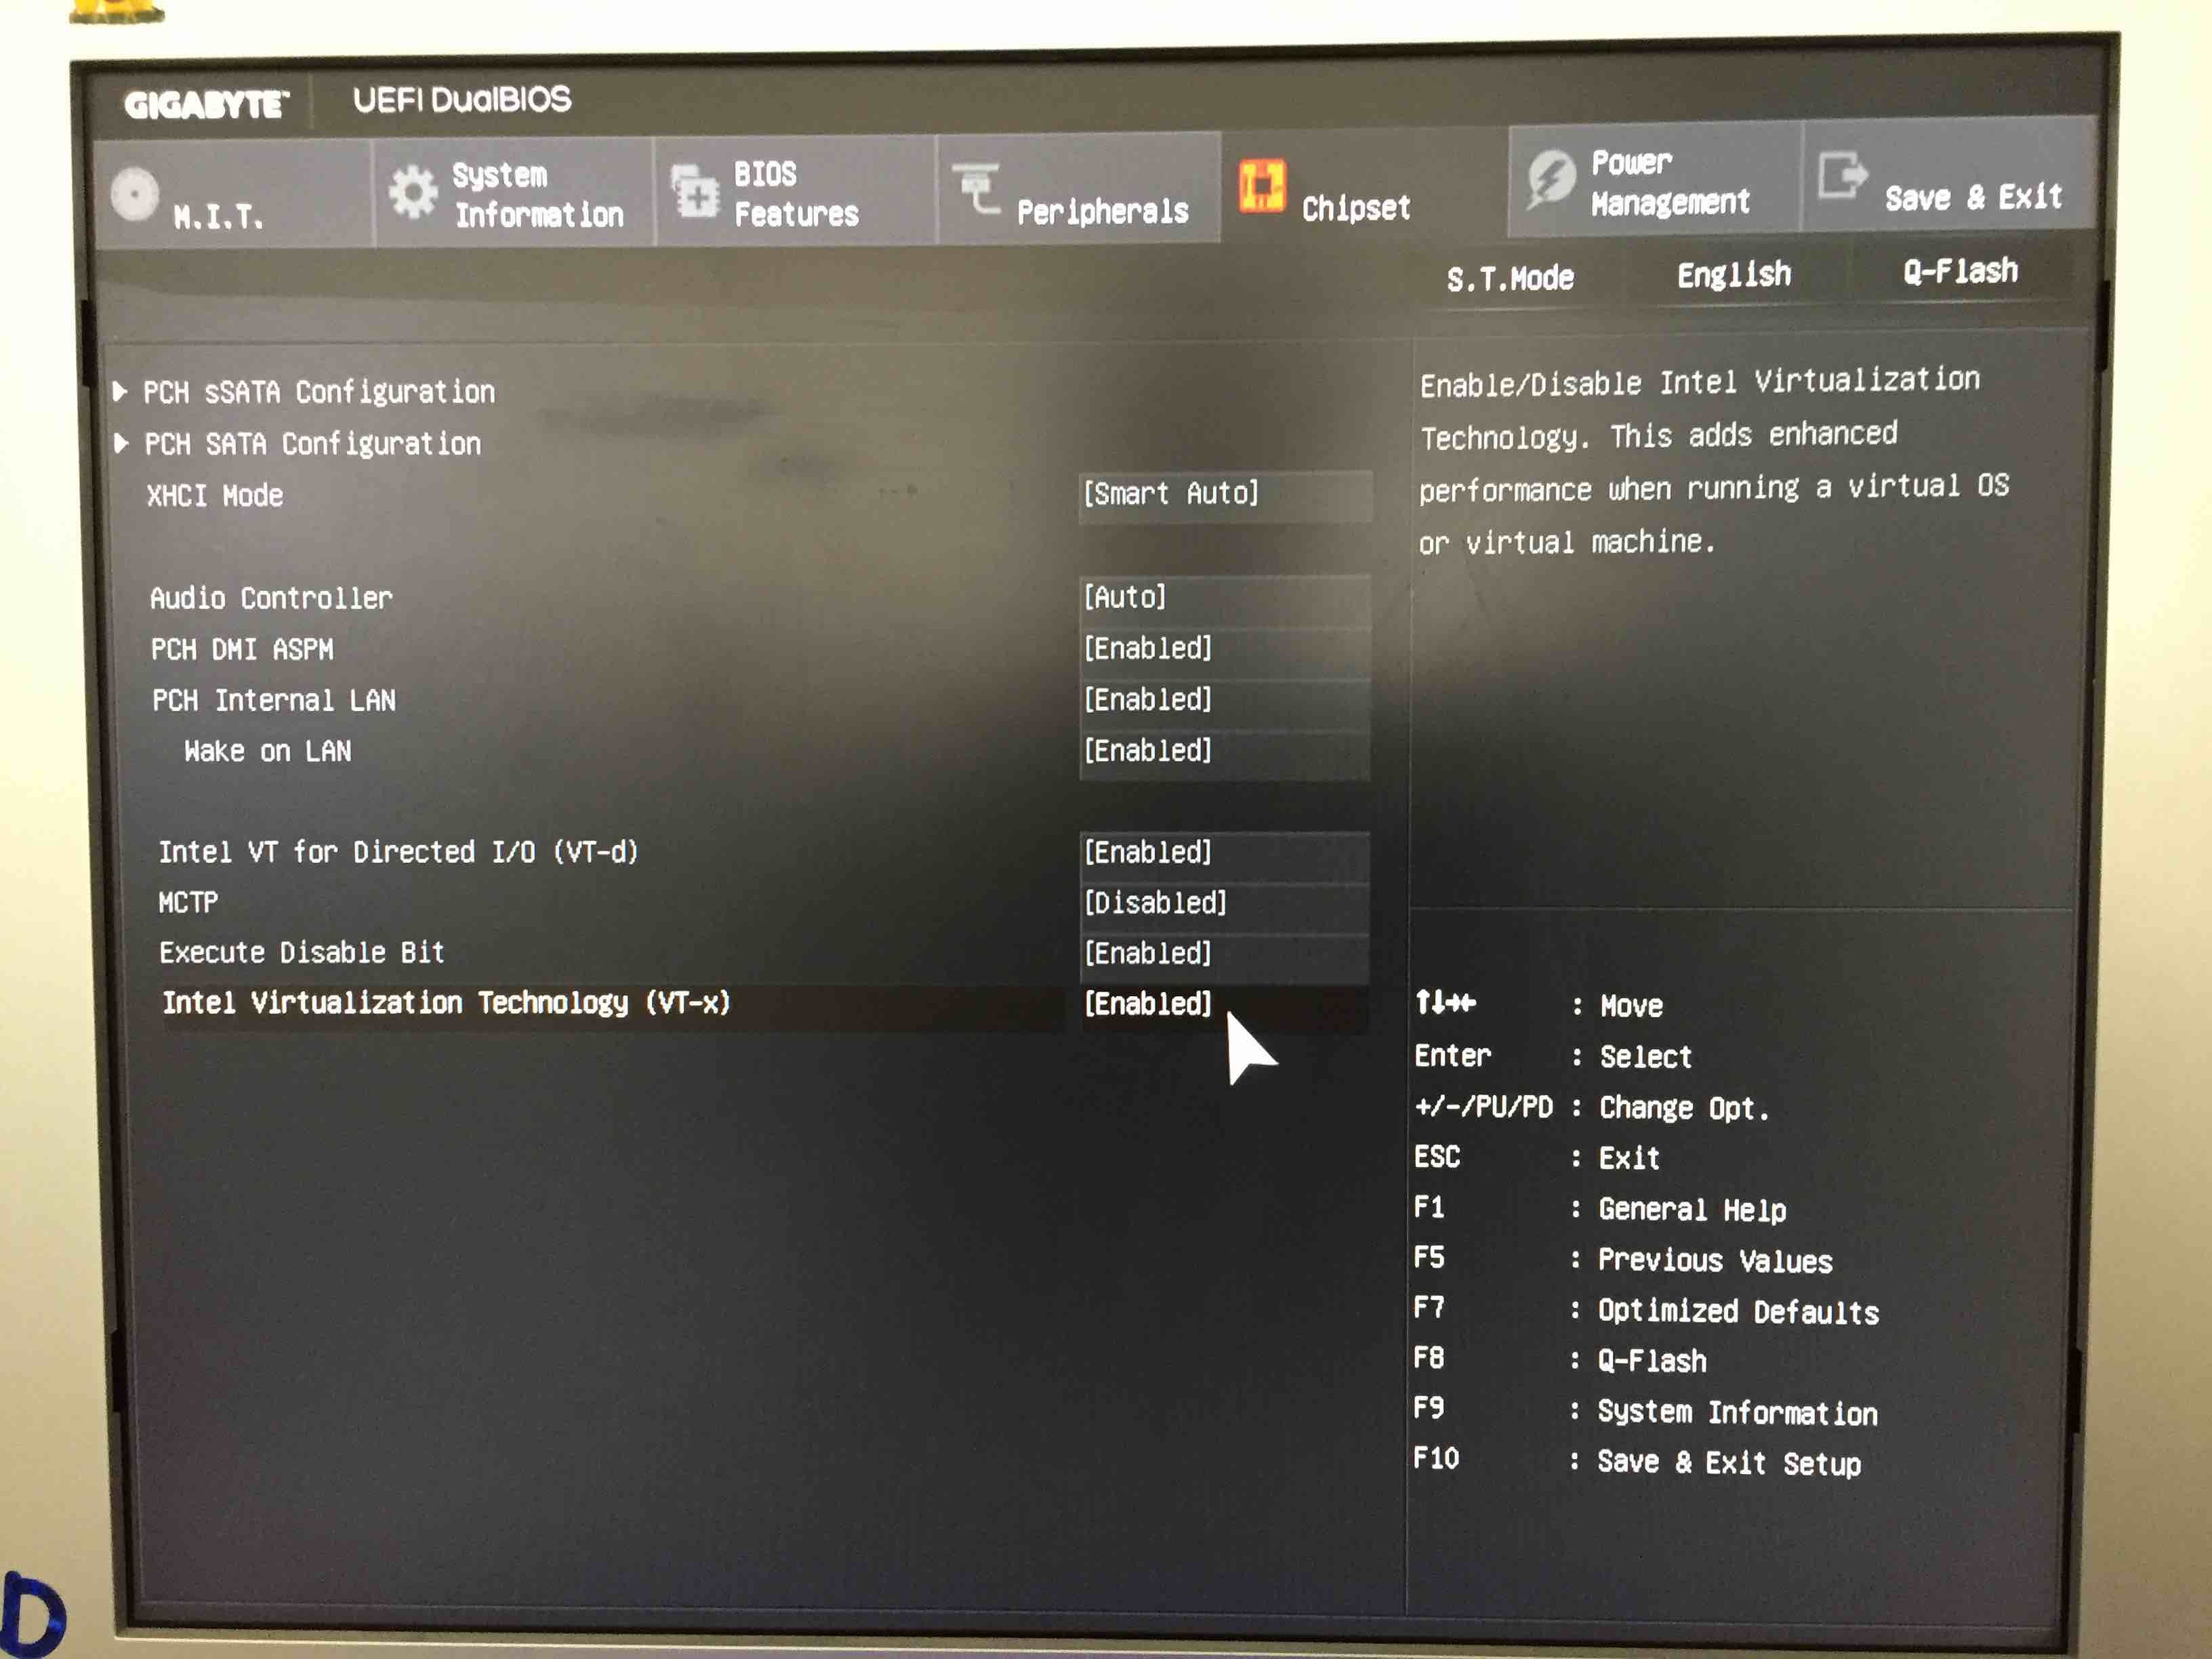 a screen shot of the virtualization settings in my computer's BIOS